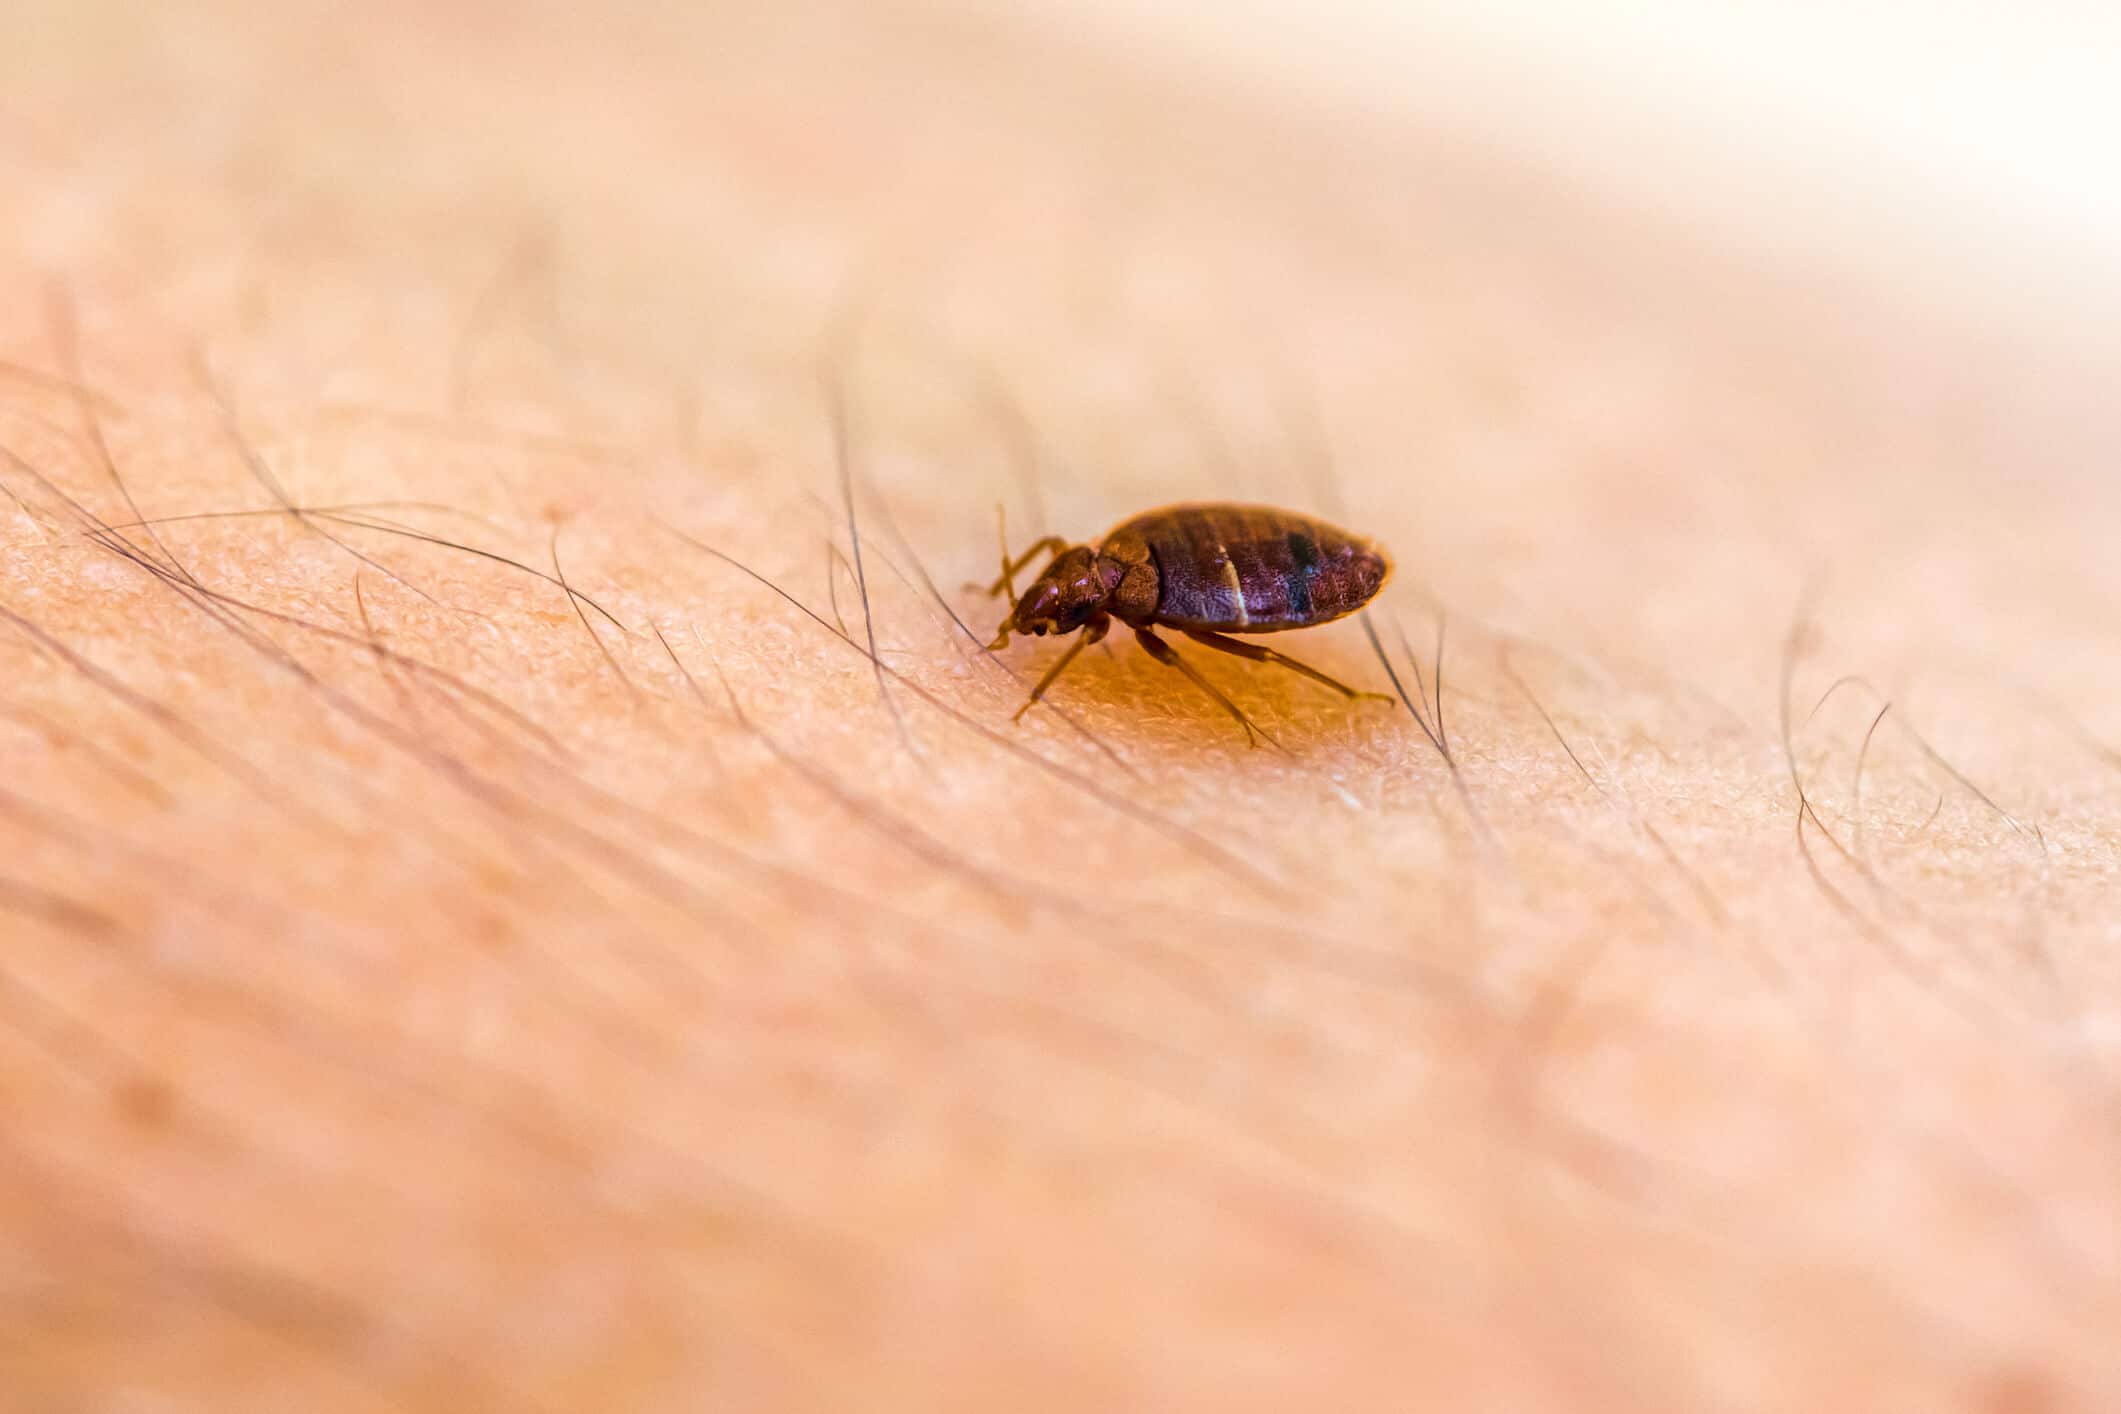 How to Prevent Bed Bug Infestation?